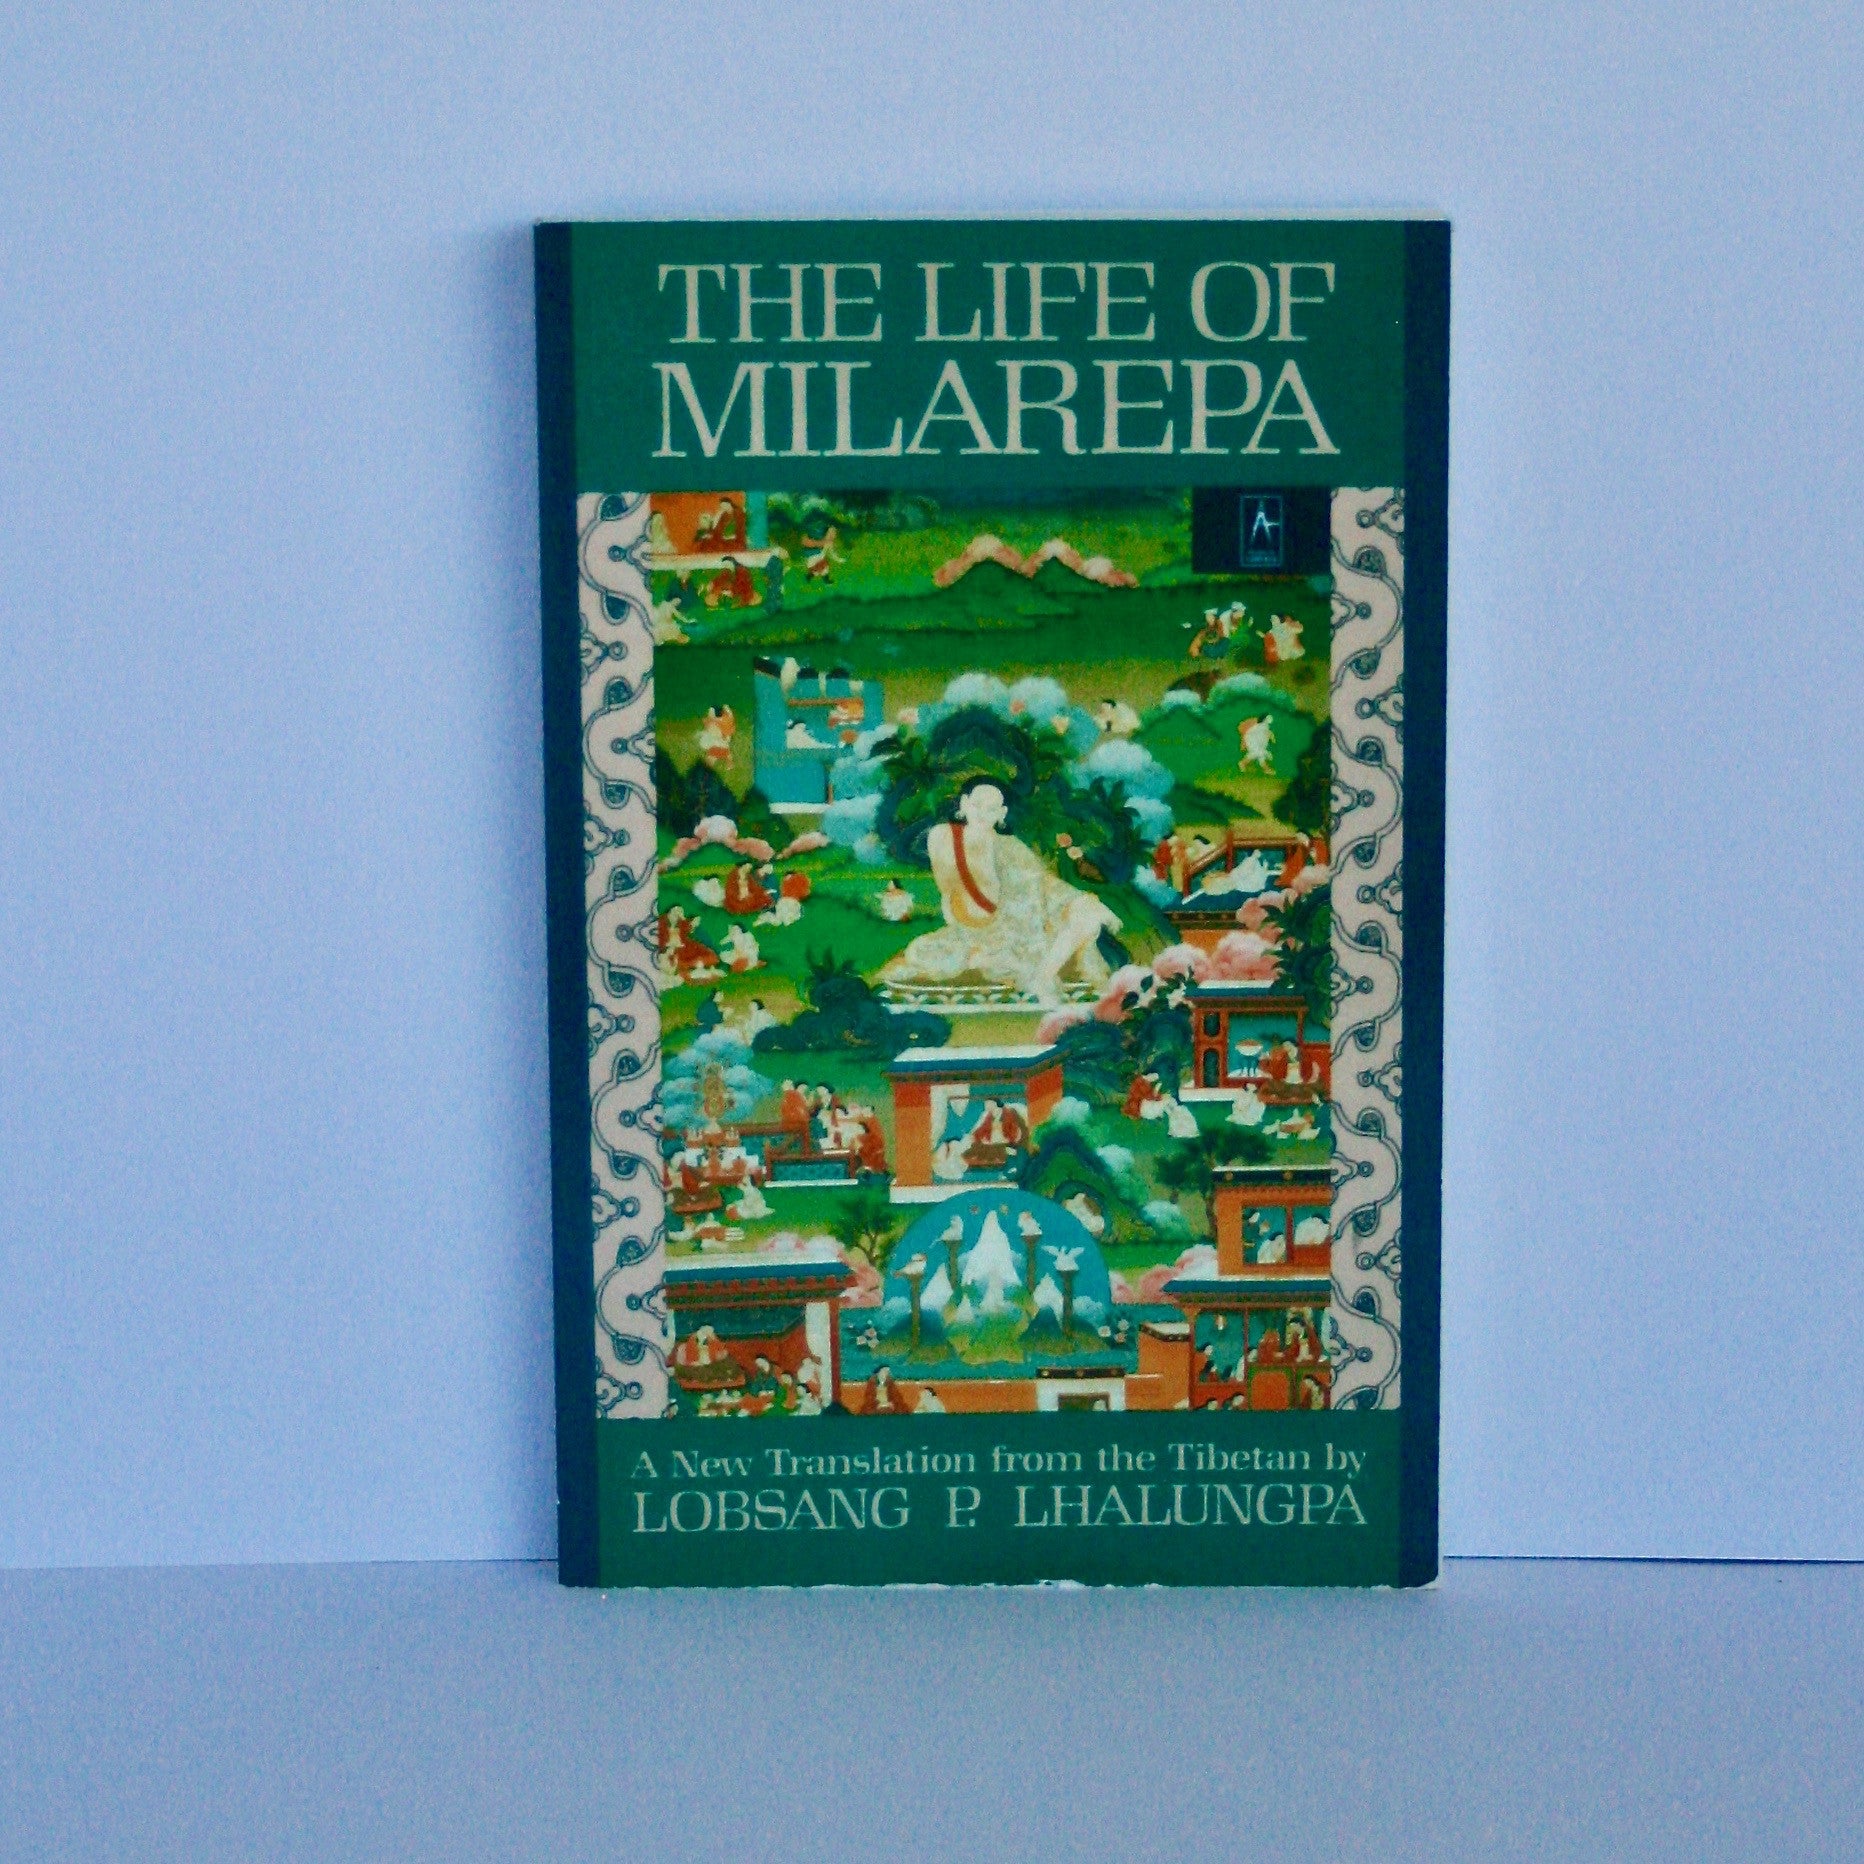 The Life of Milarepa by Lobsang P. Lhalungpa